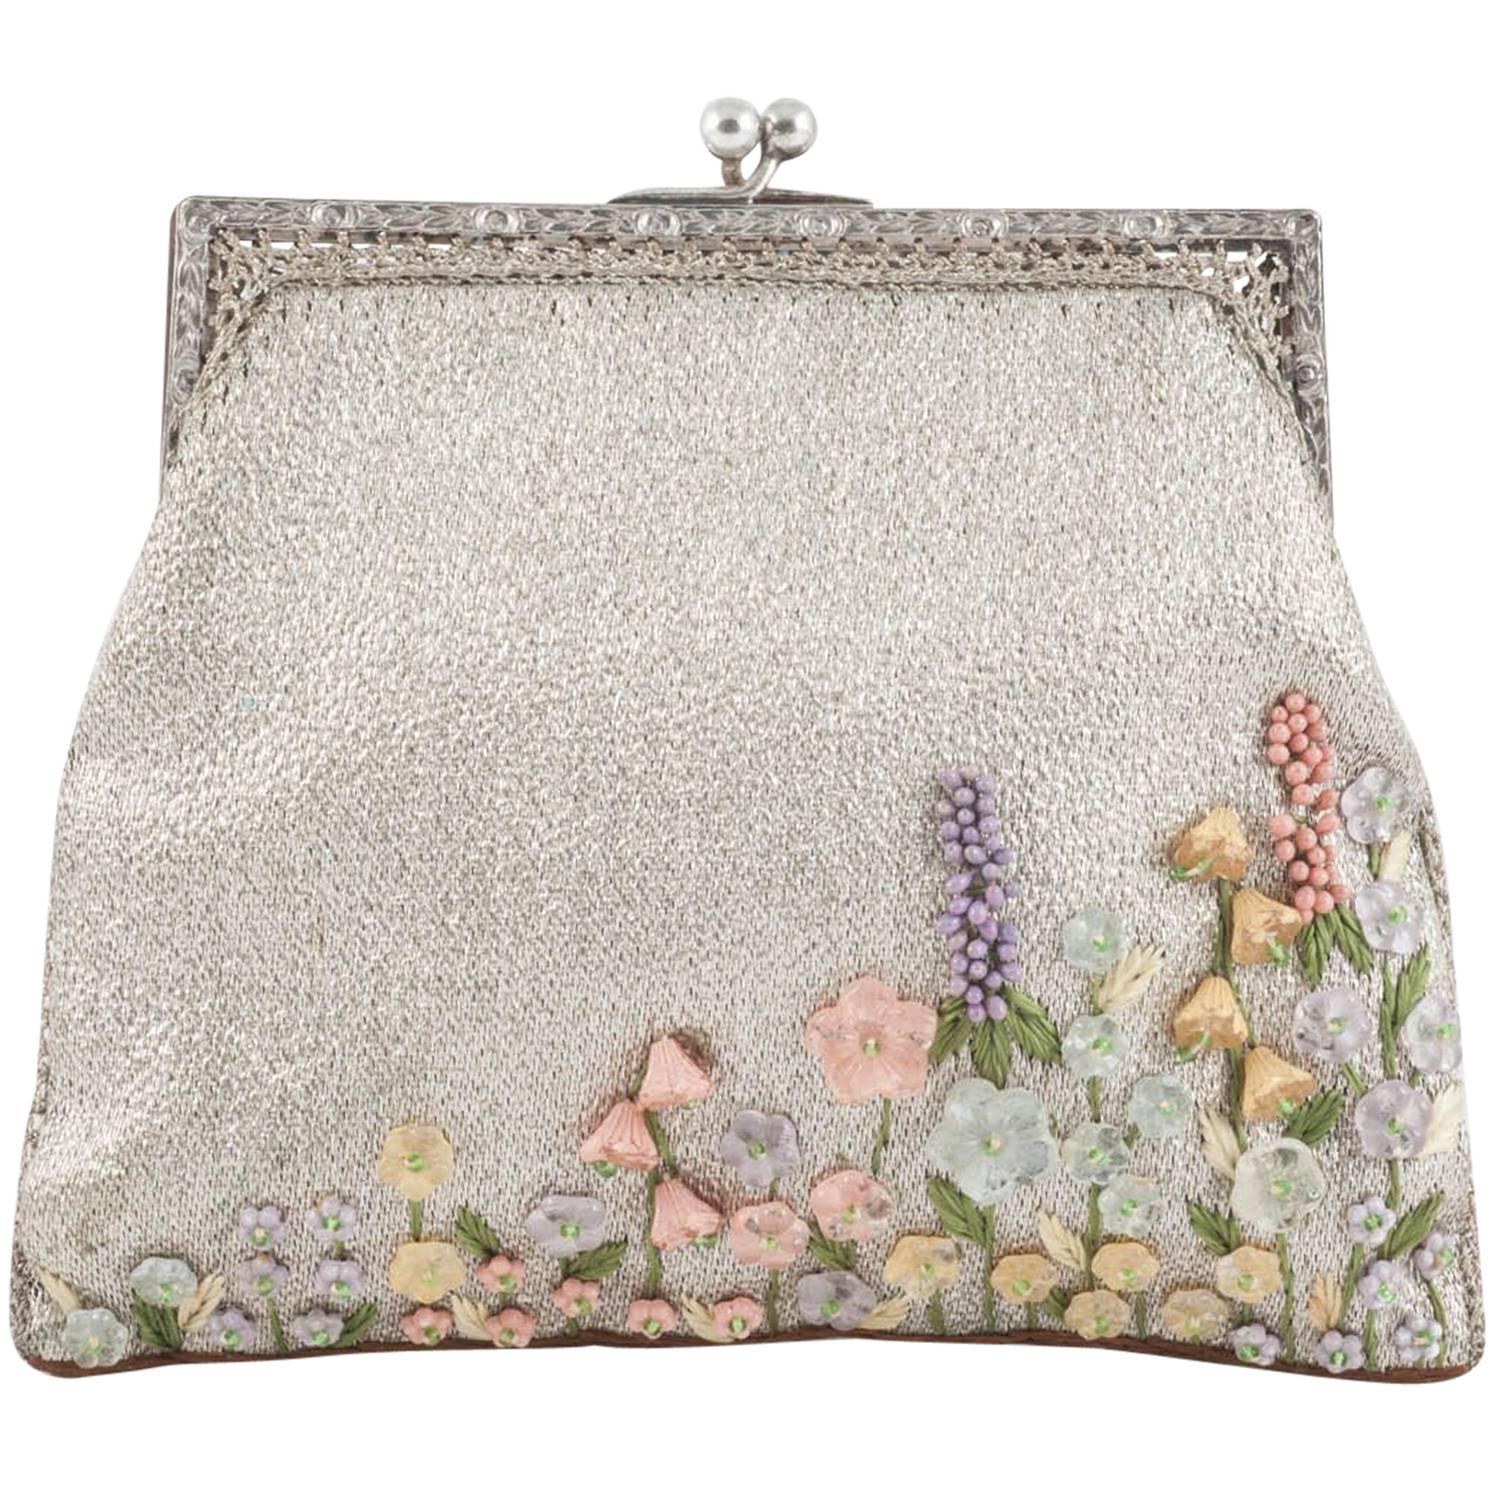 Exquisite silver clutch, with hand painted flower decoration, 1920s